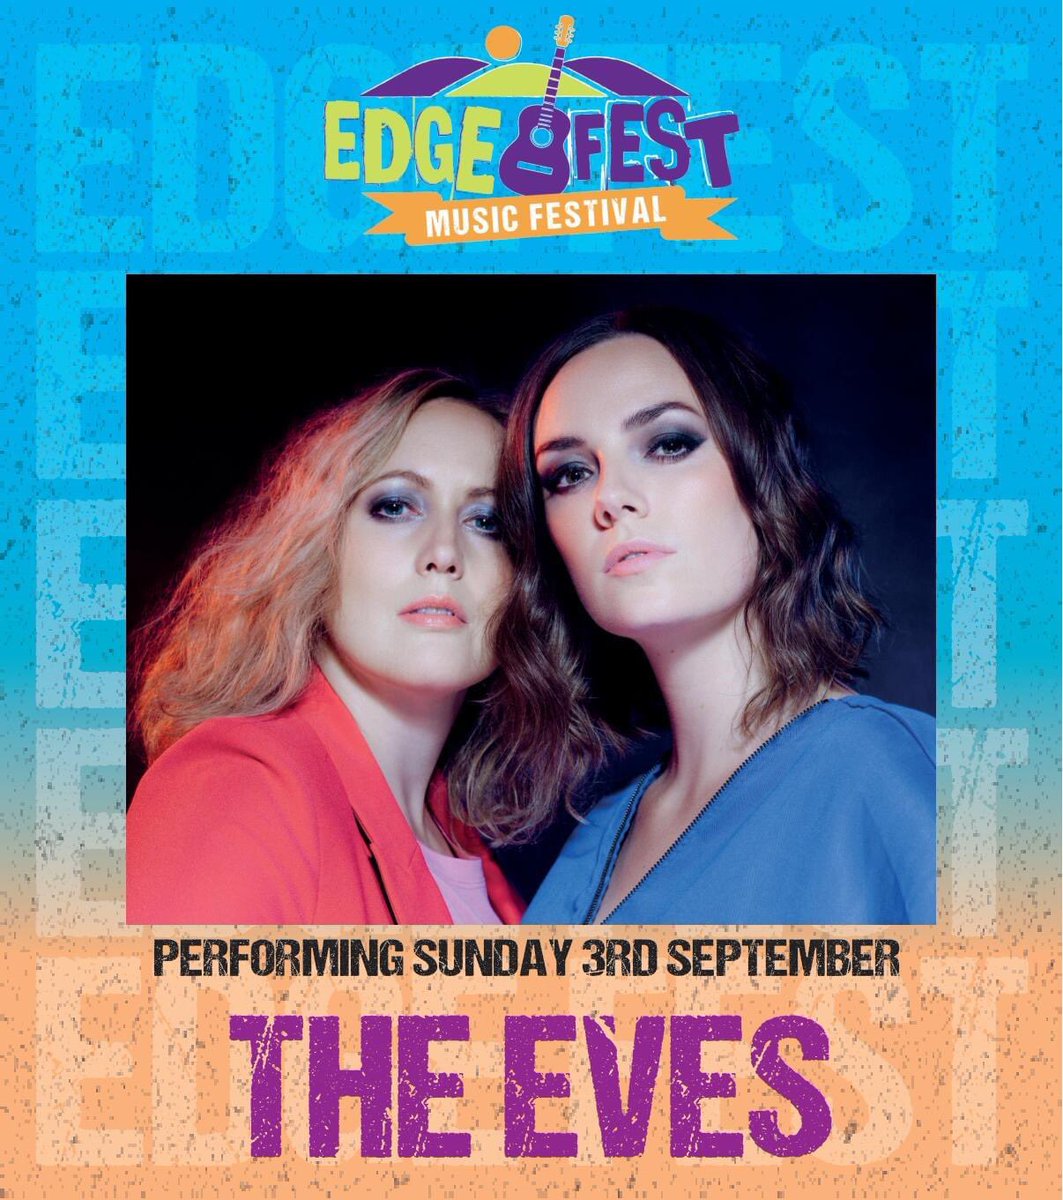 We can’t wait to perform with our full band on Sun 3rd Sep at Edge Fest in the Scottish Borders. We’re on the line-up with @SKERRYVORE @SophieEB @GabrielleUk + @wetwetwetuk Get your tickets: edge-fest.co.uk/tickets/